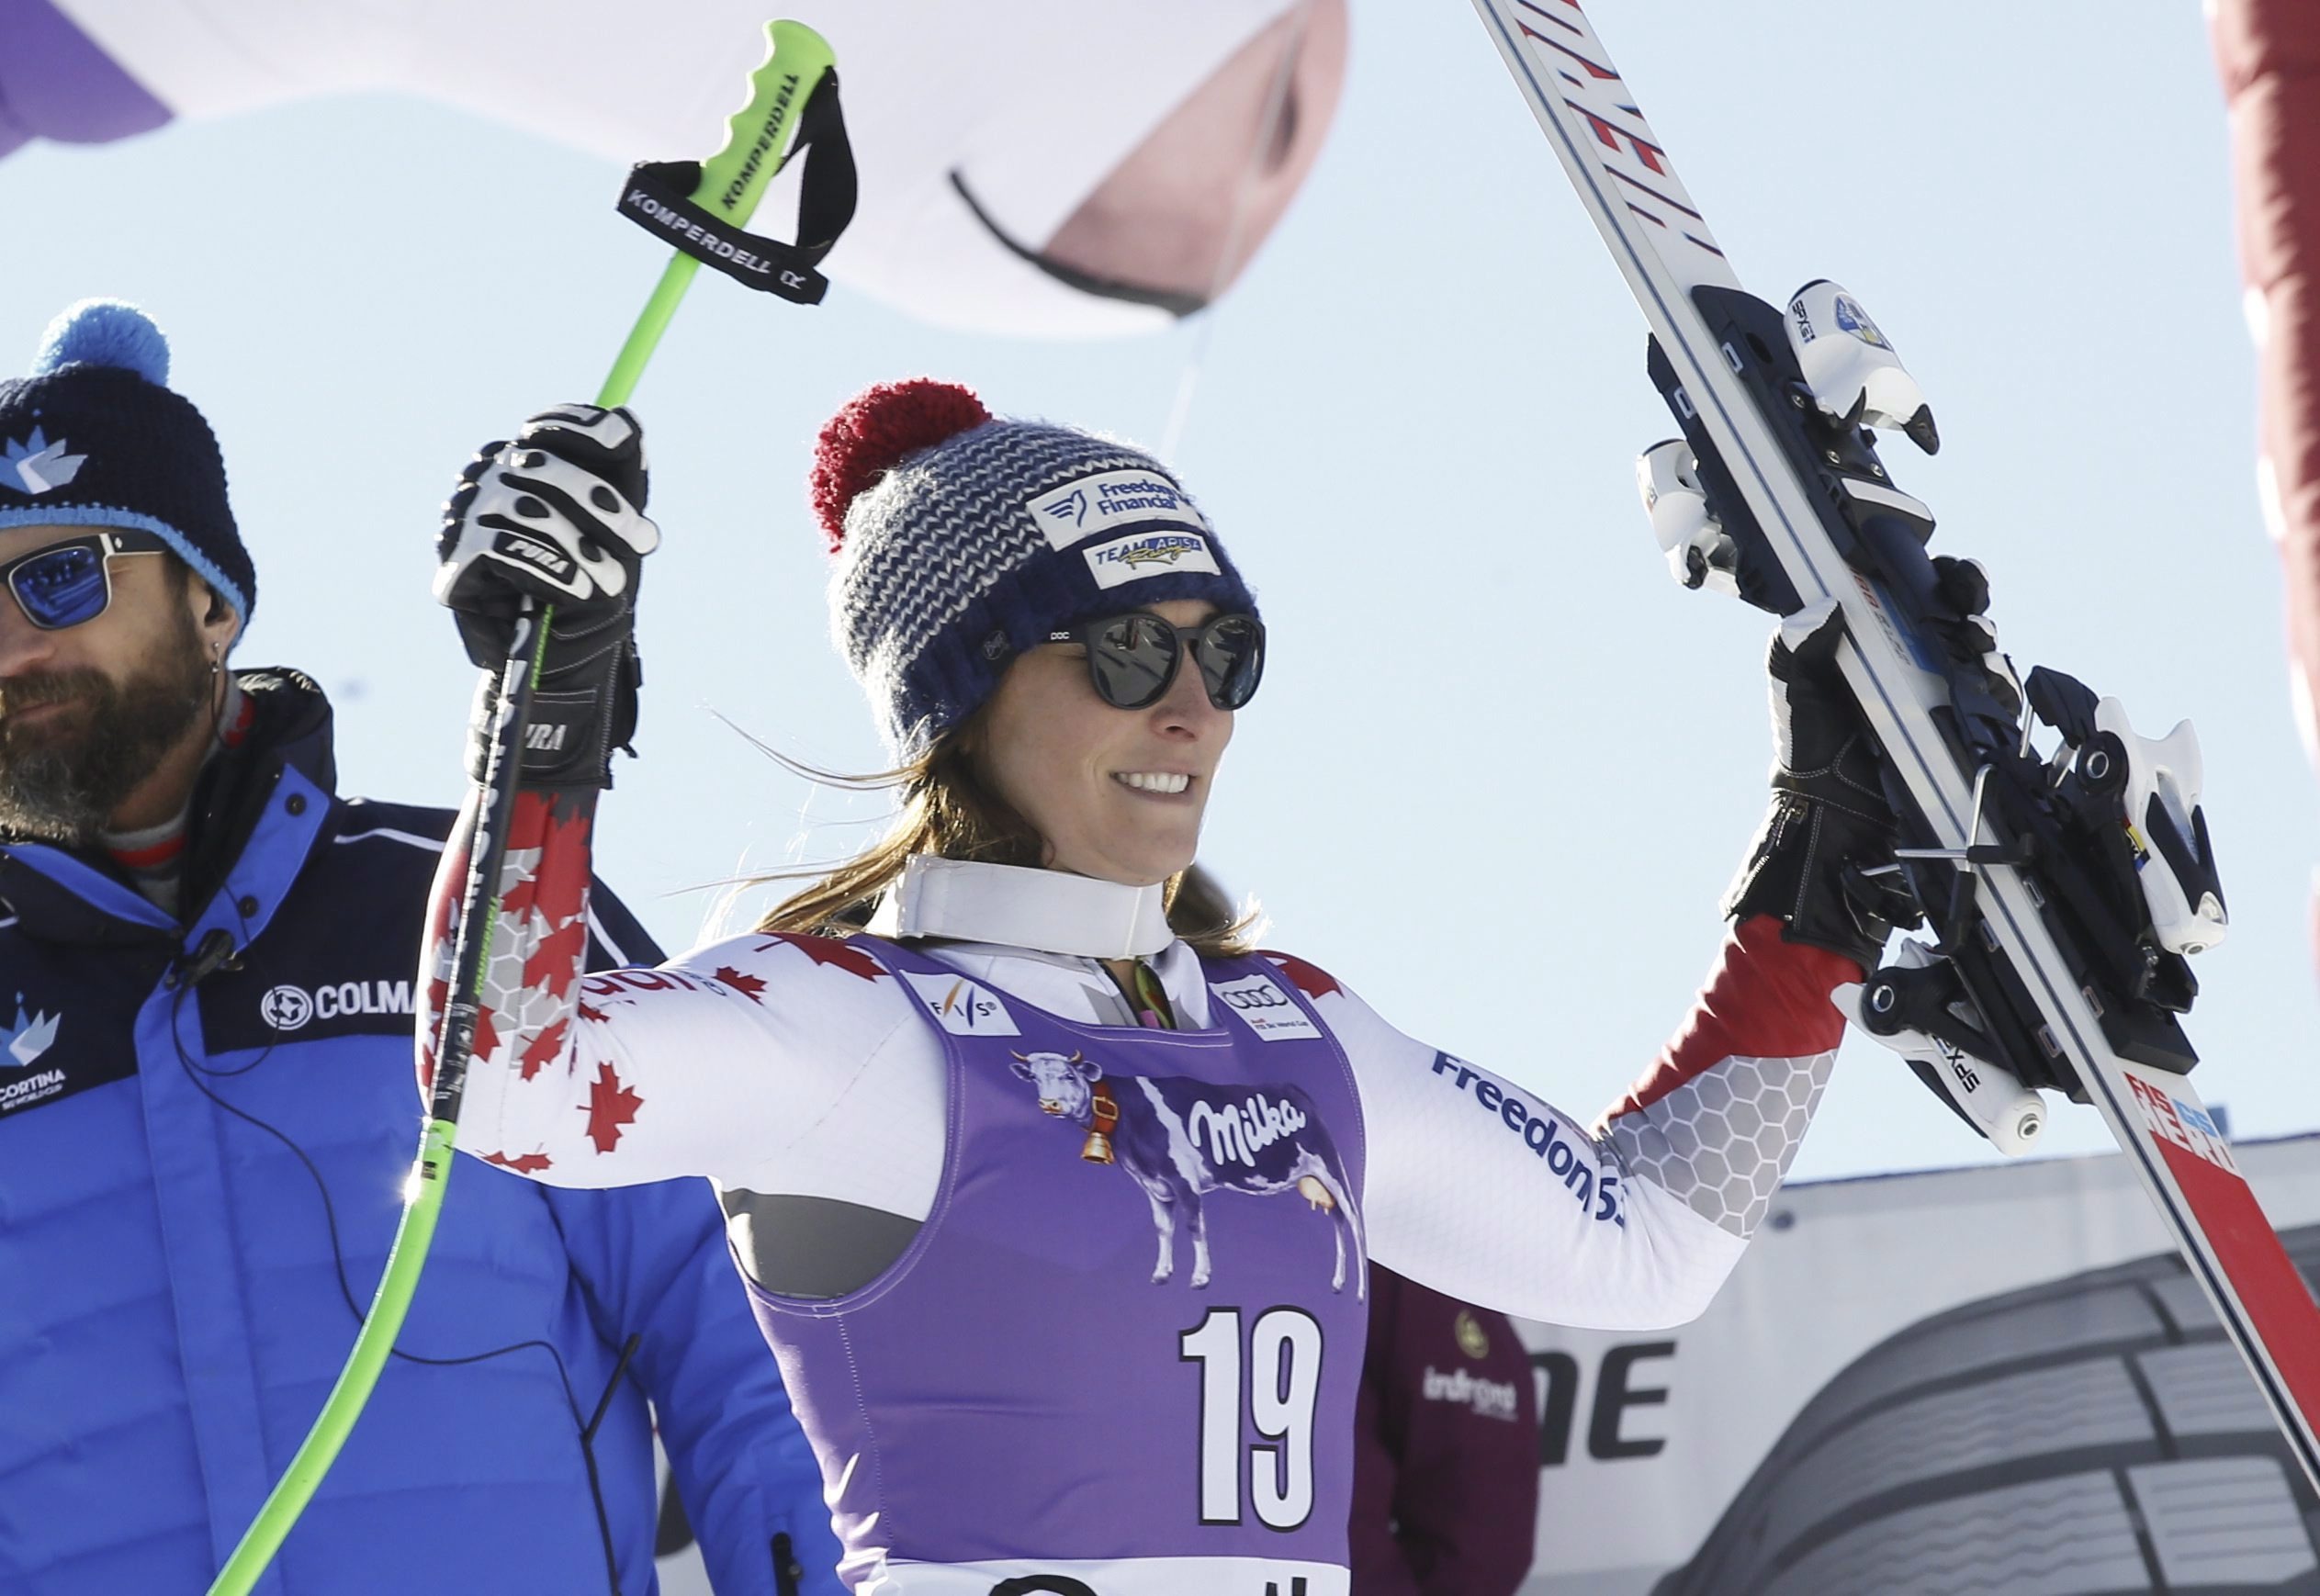 Canada's Larisa Yurkiw celebrates her second place after completing an alpine ski, women's World Cup downhill, in Cortina D'Ampezzo, Italy, Saturday, Jan. 23, 2016. (AP Photo/Armando Trovati)